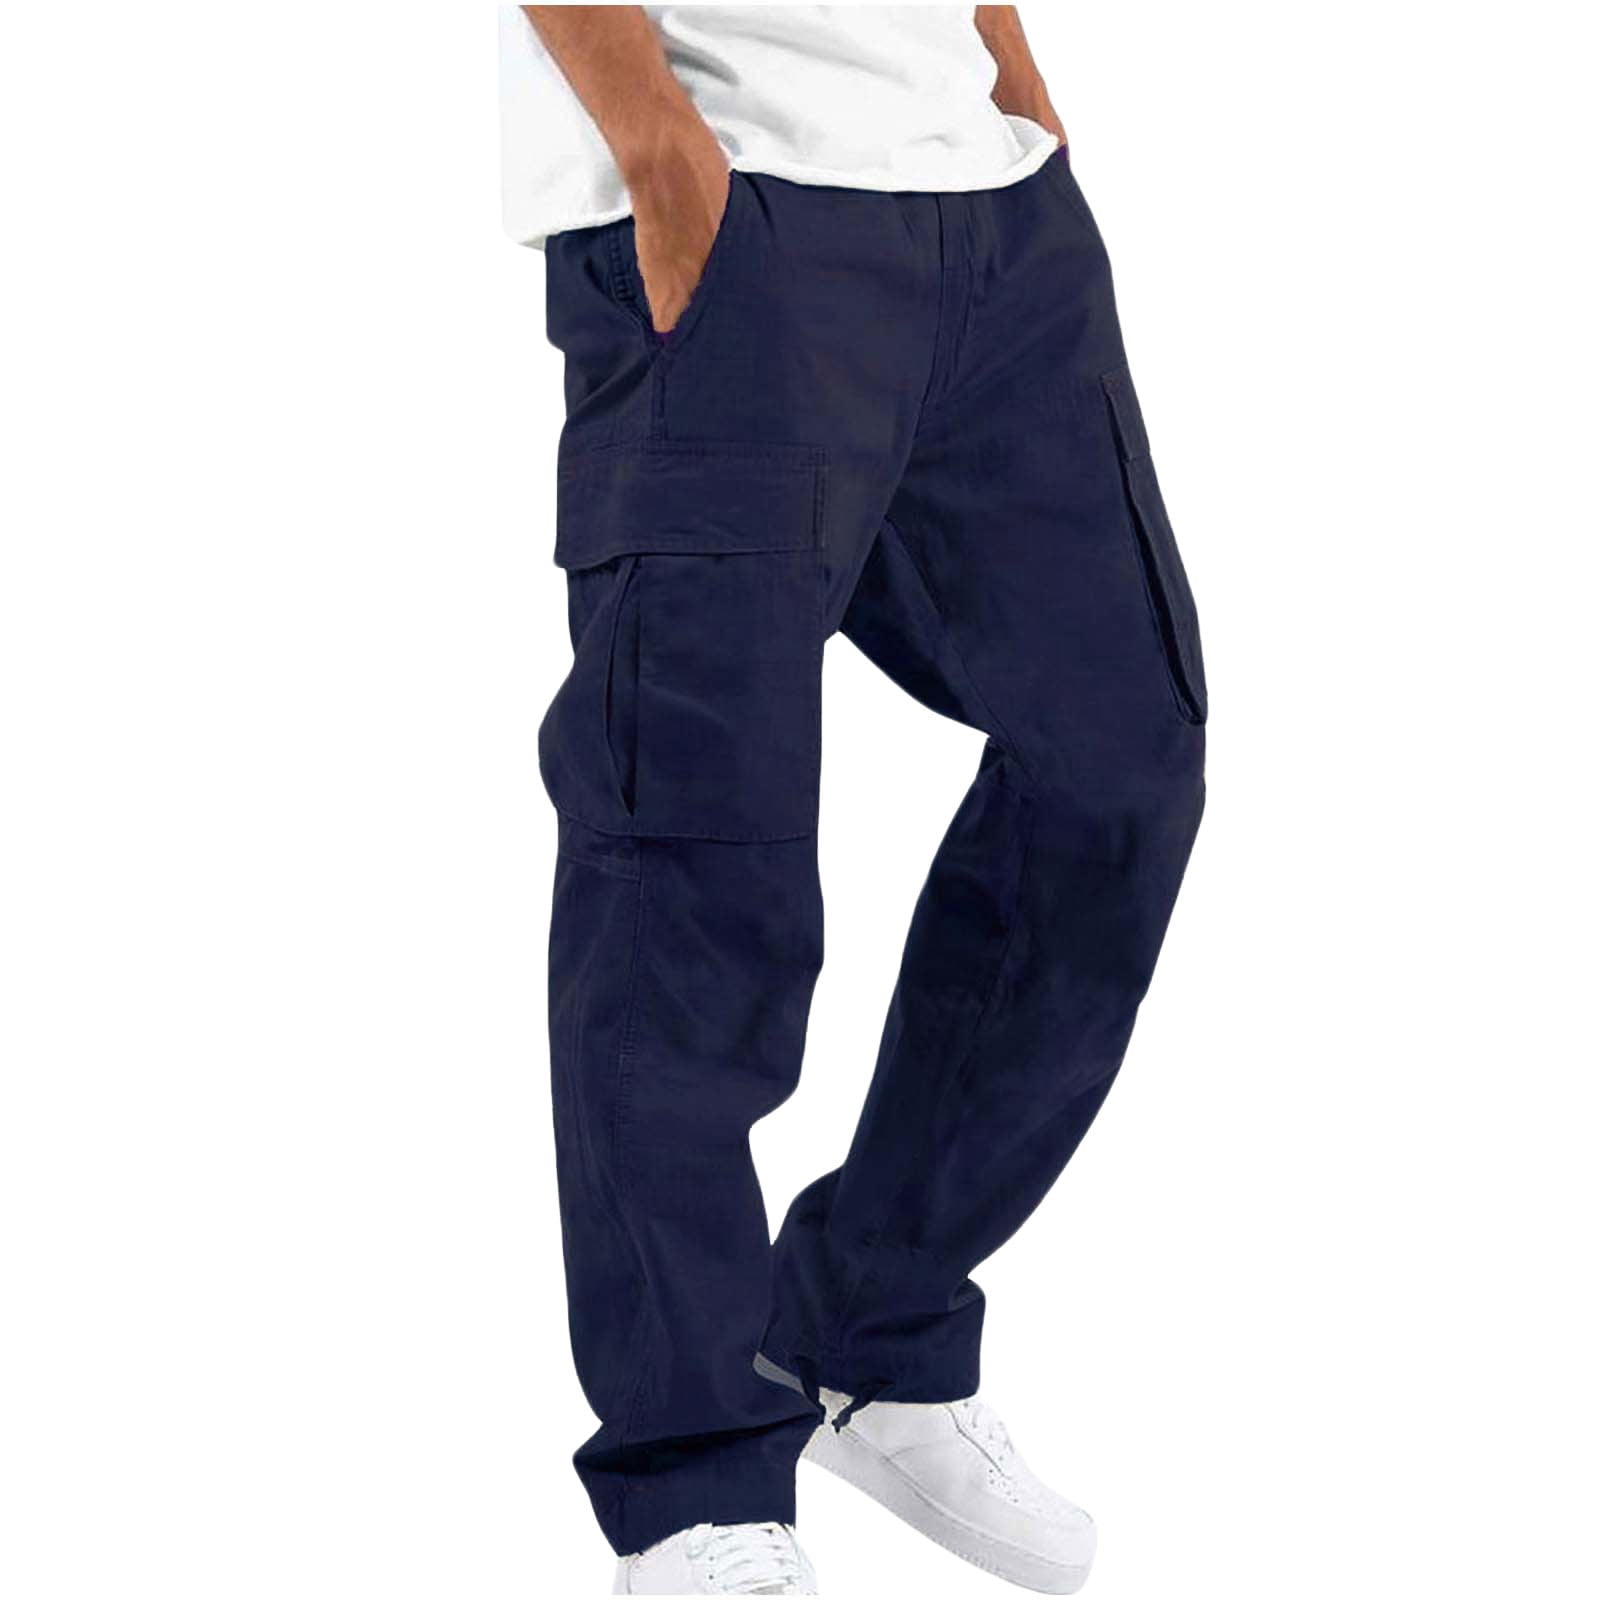 XFLWAM Men's Cargo Cargo Lightweight Work Pants Hiking Ripstop Cargo Pants  Relaxed Fit Mens Cargo Pant-Reg and Big and Tall Sizes Navy Blue 4XL